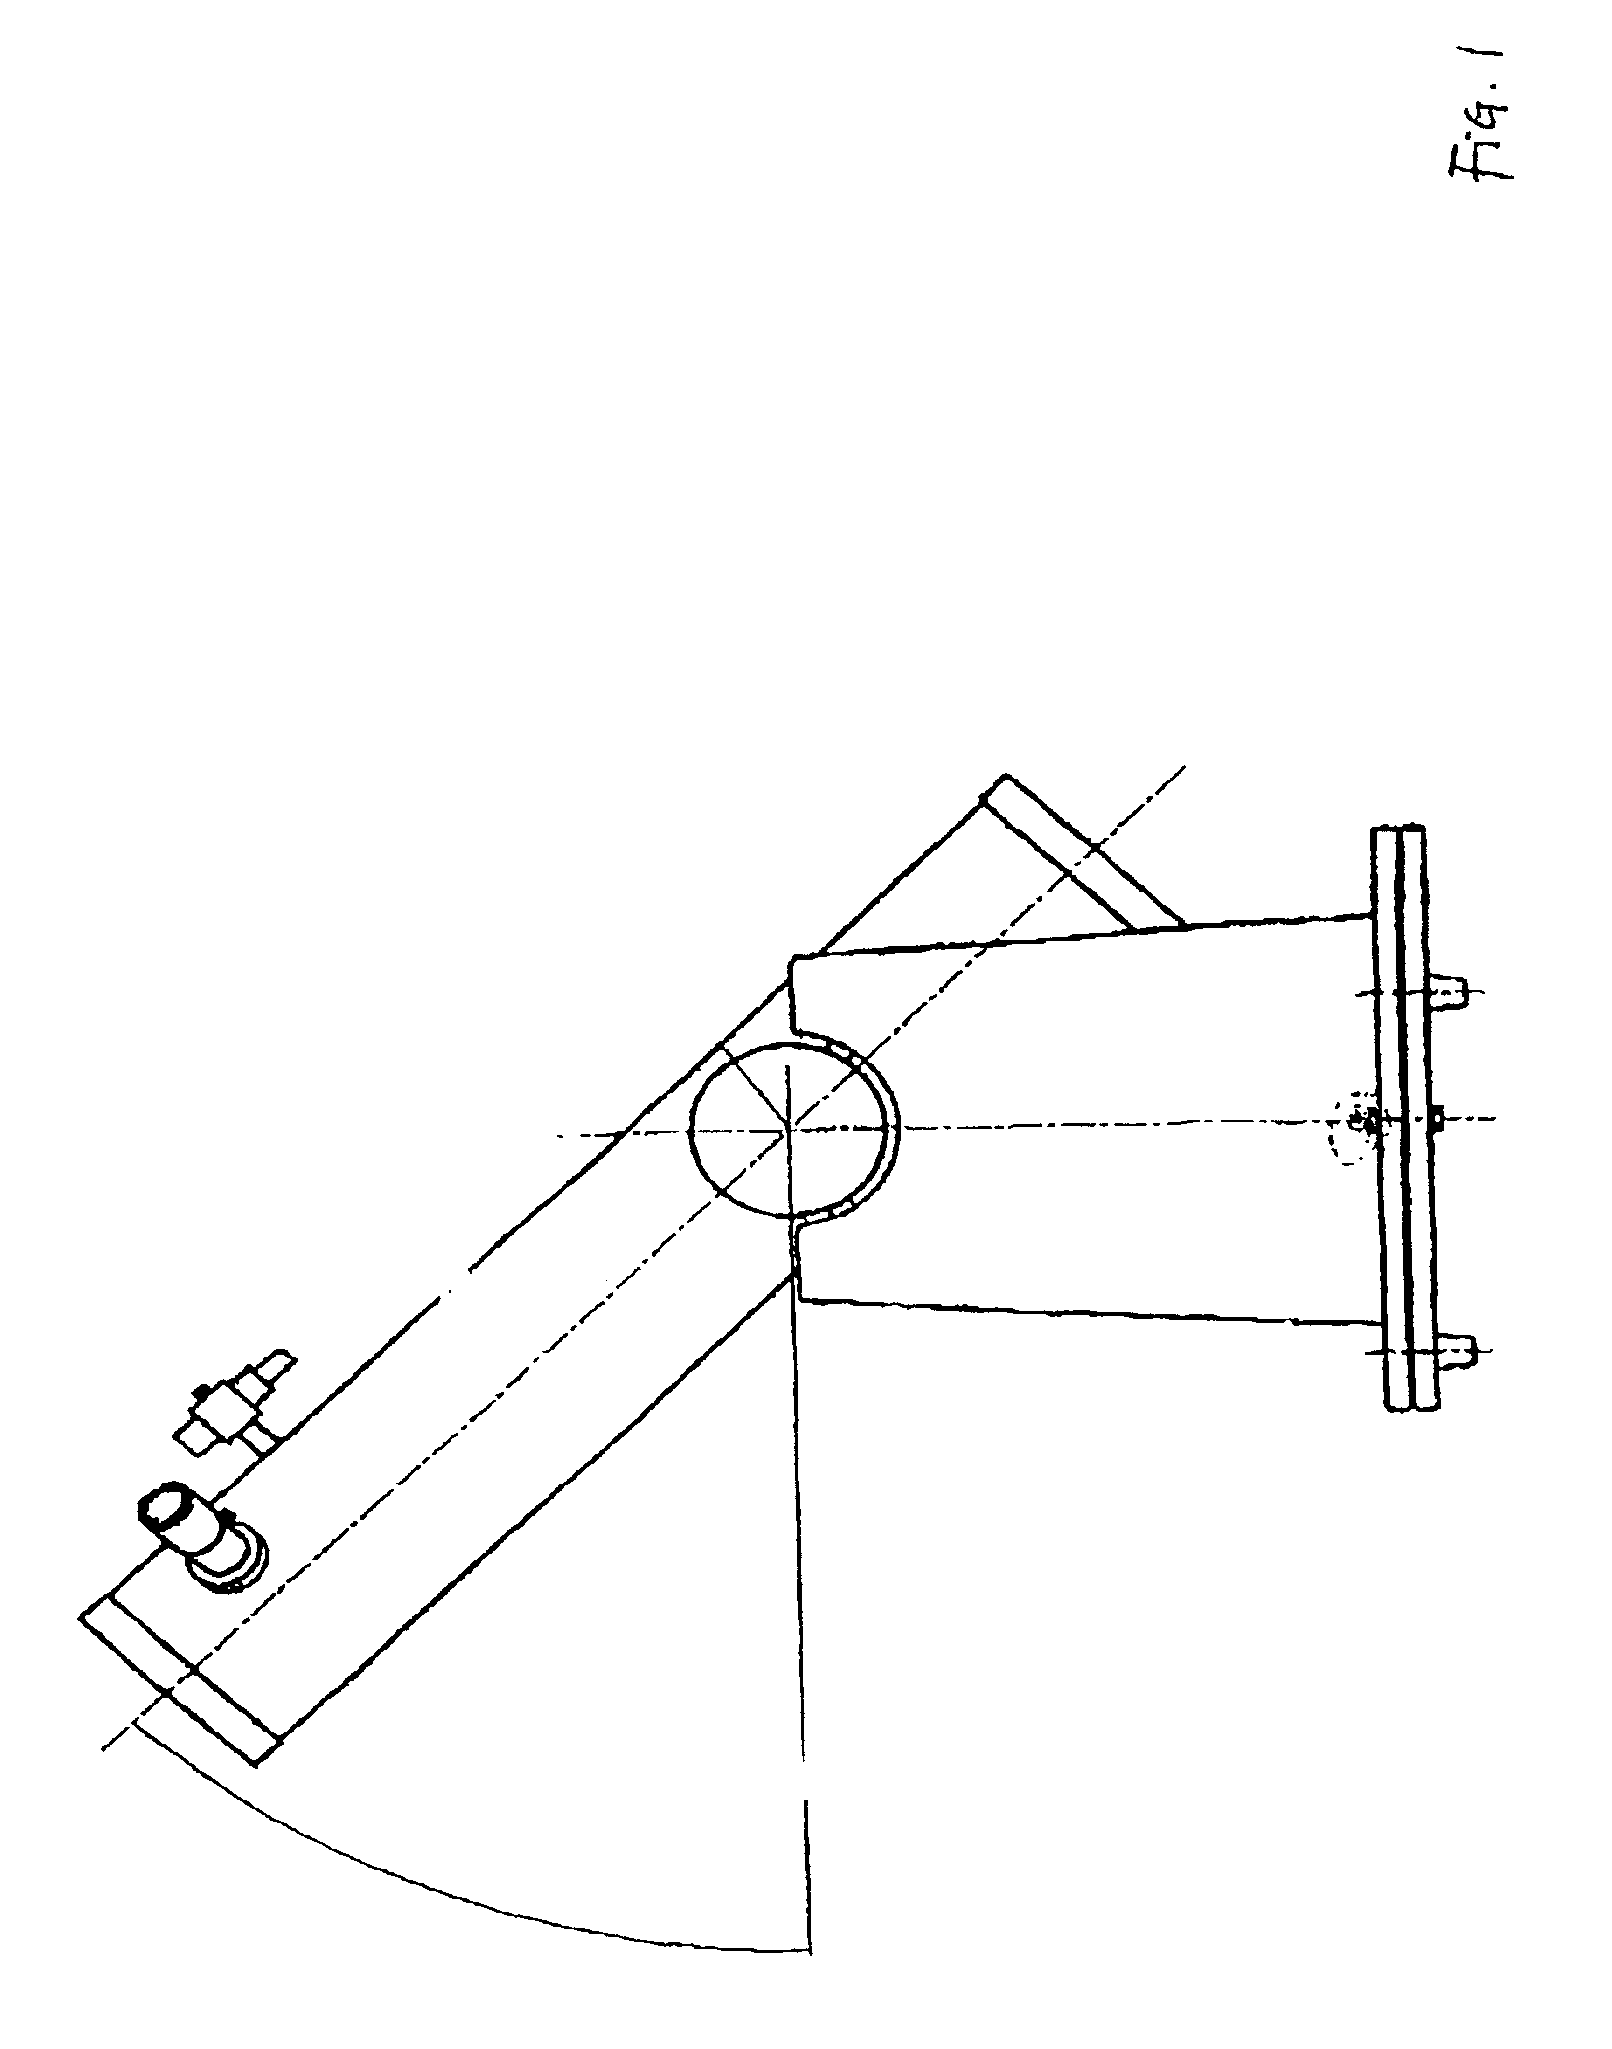 Apparatus and method for stabilizing an optical tube on a base